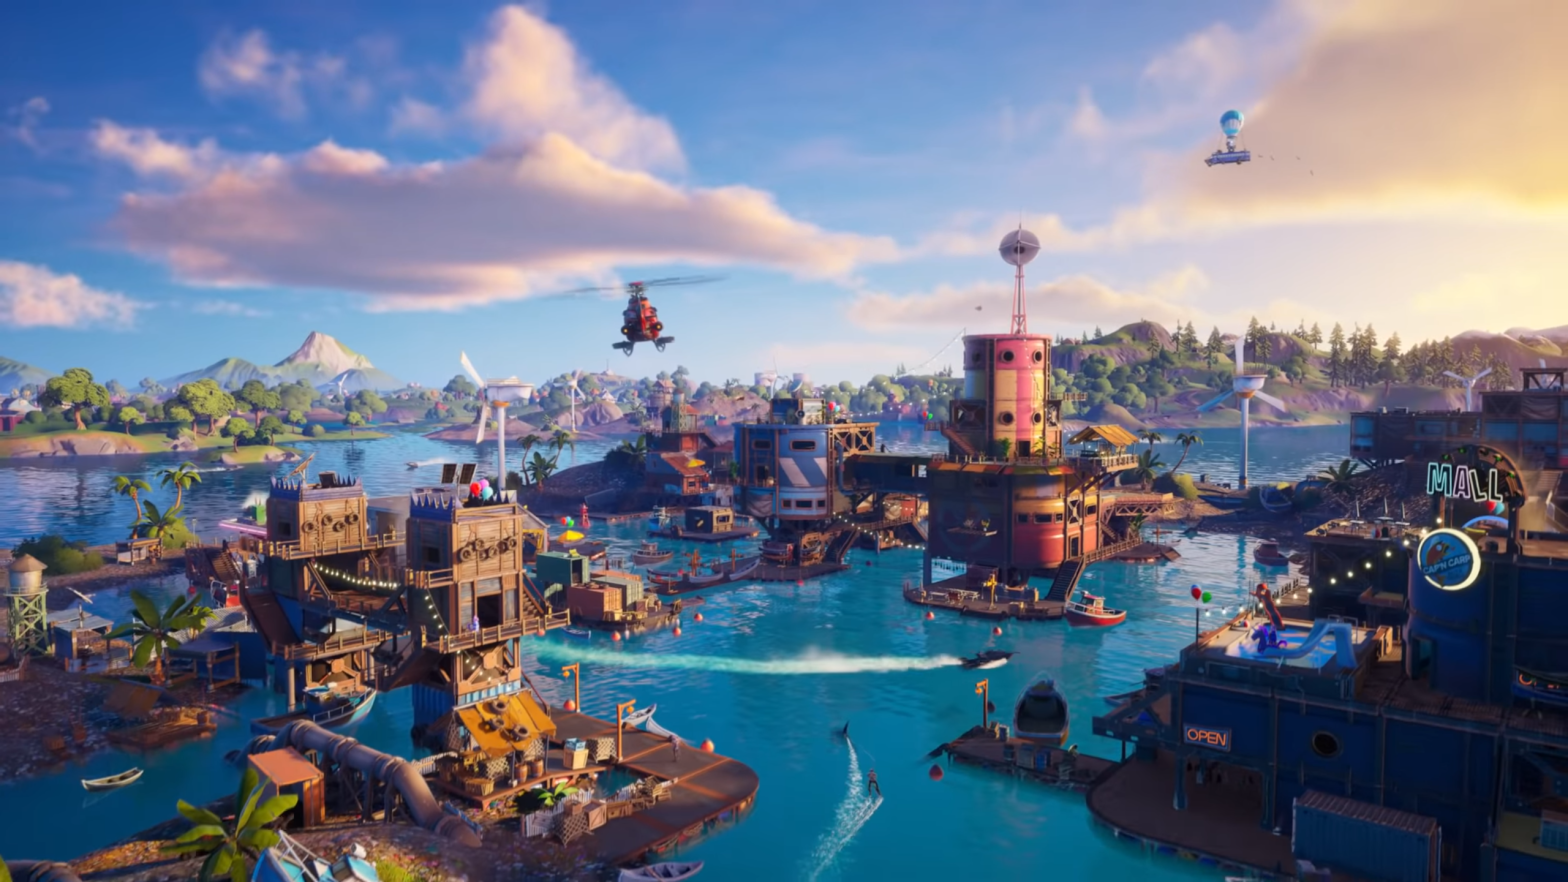 Fortnite's latest season updated the map by flooding most of it, but keeping a convenient place to stream Chris Nolan movies, apparently. (Image: Epic Games)